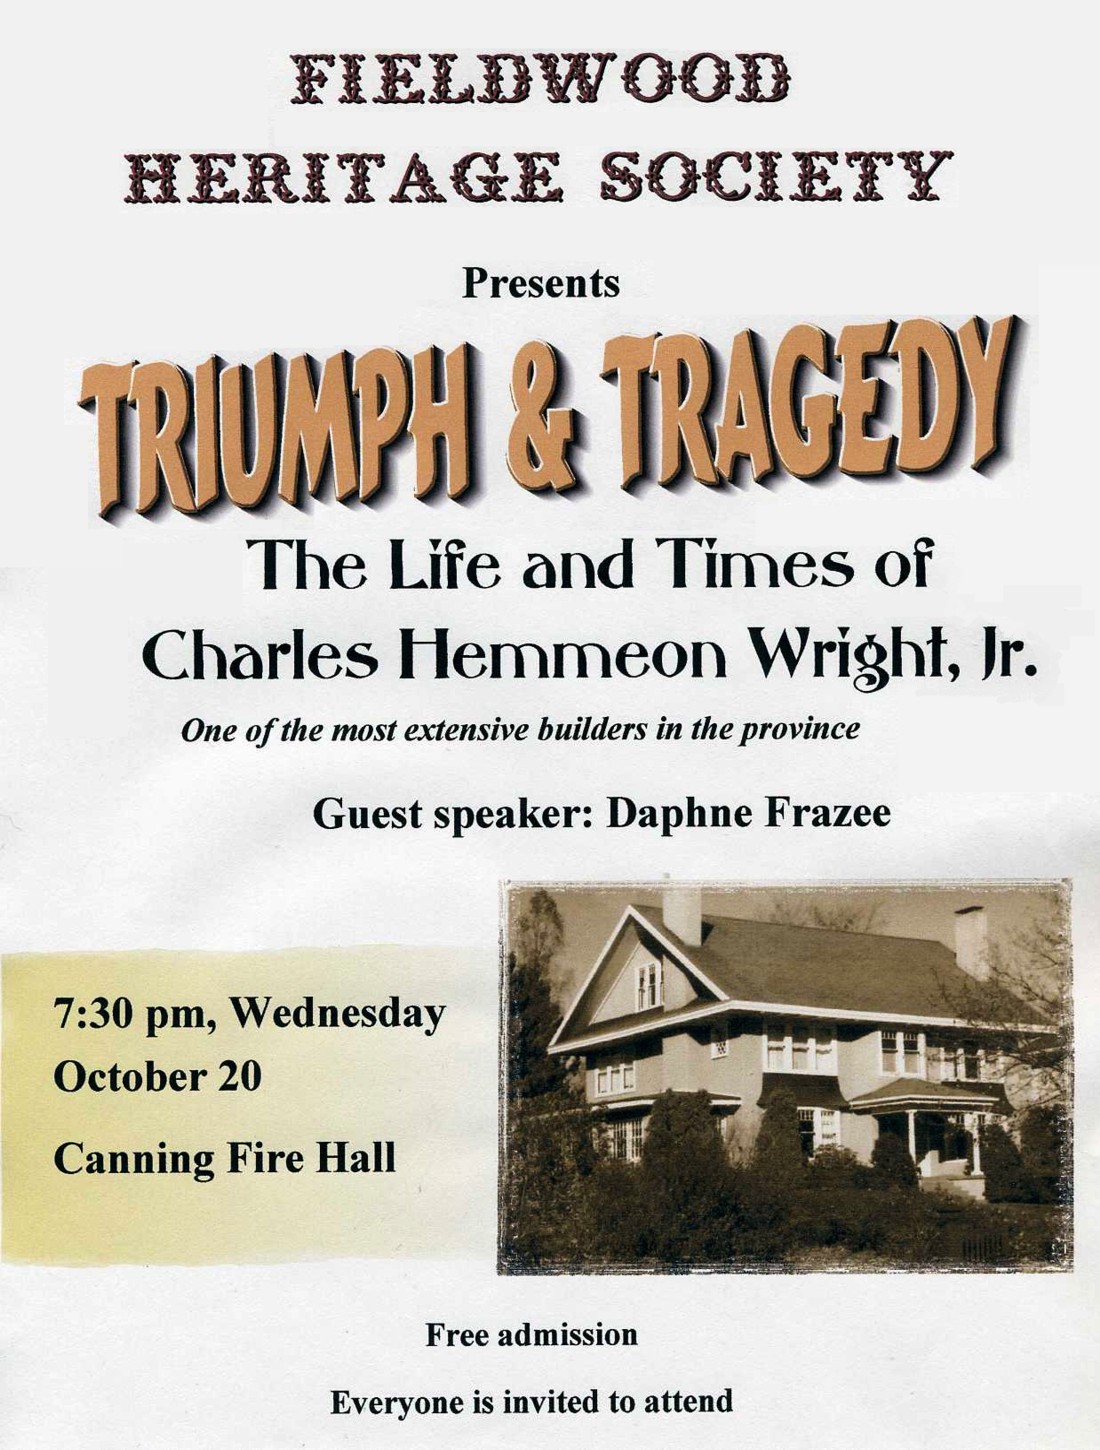 Fieldwood Heritage Society: Charles Hemmeon Wright Jr. Life and Times, 20 October 2010